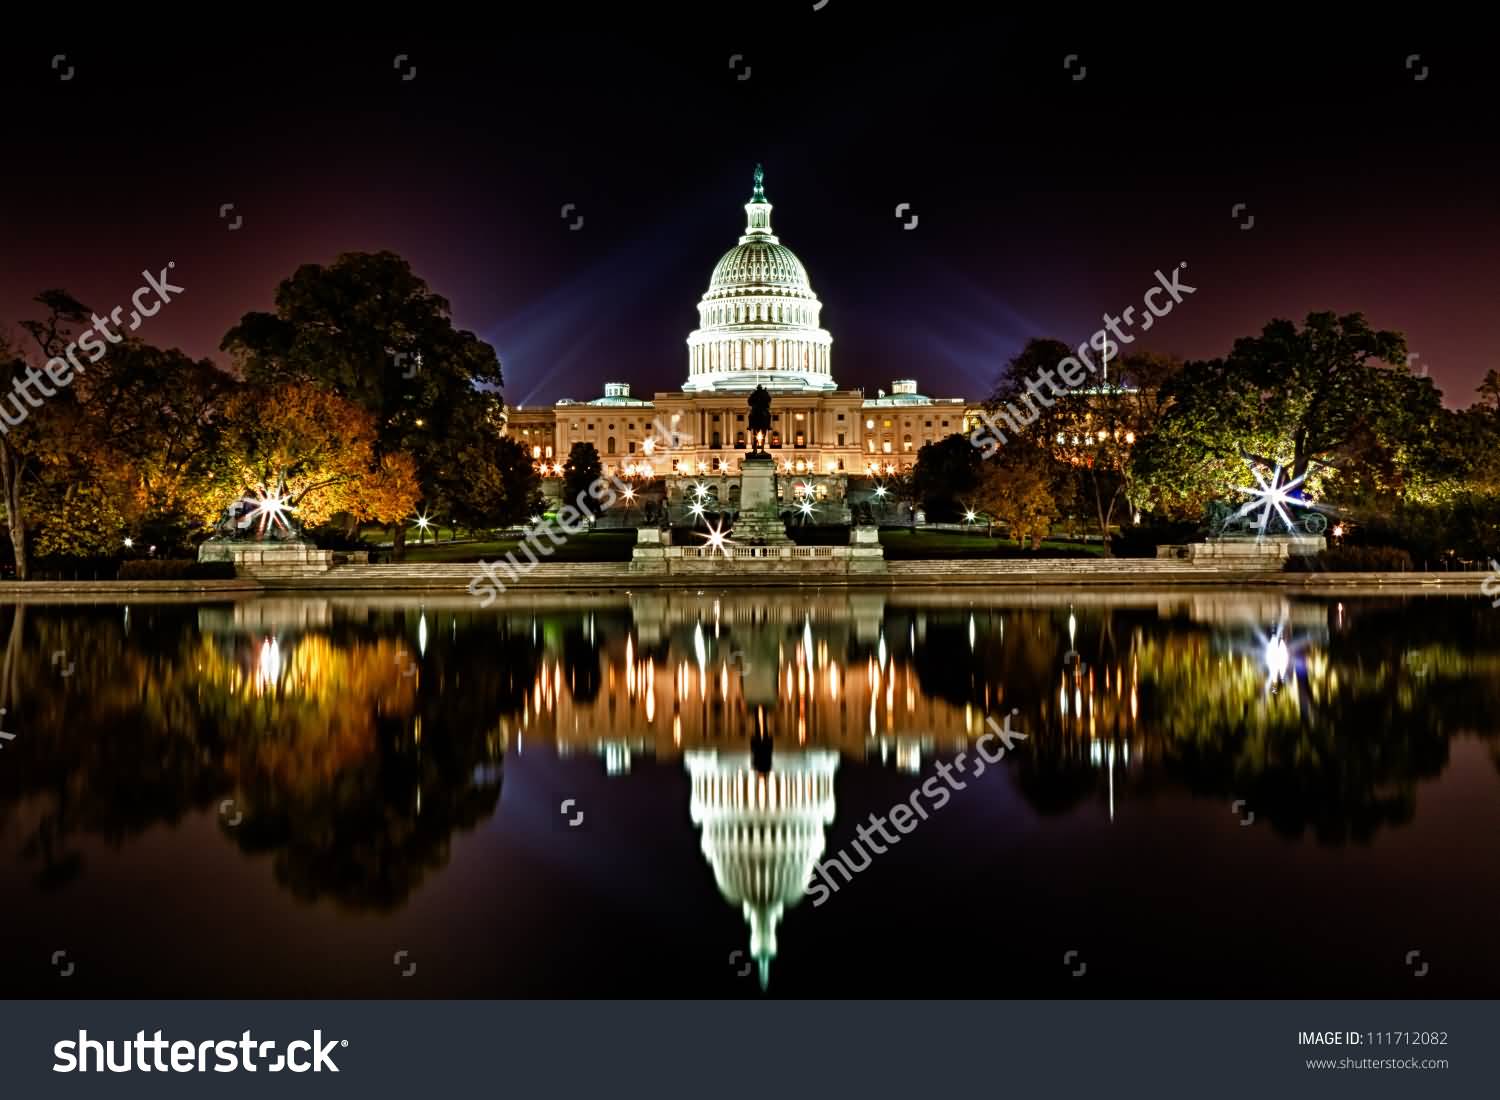 United States Capitol Reflection In Water At Night